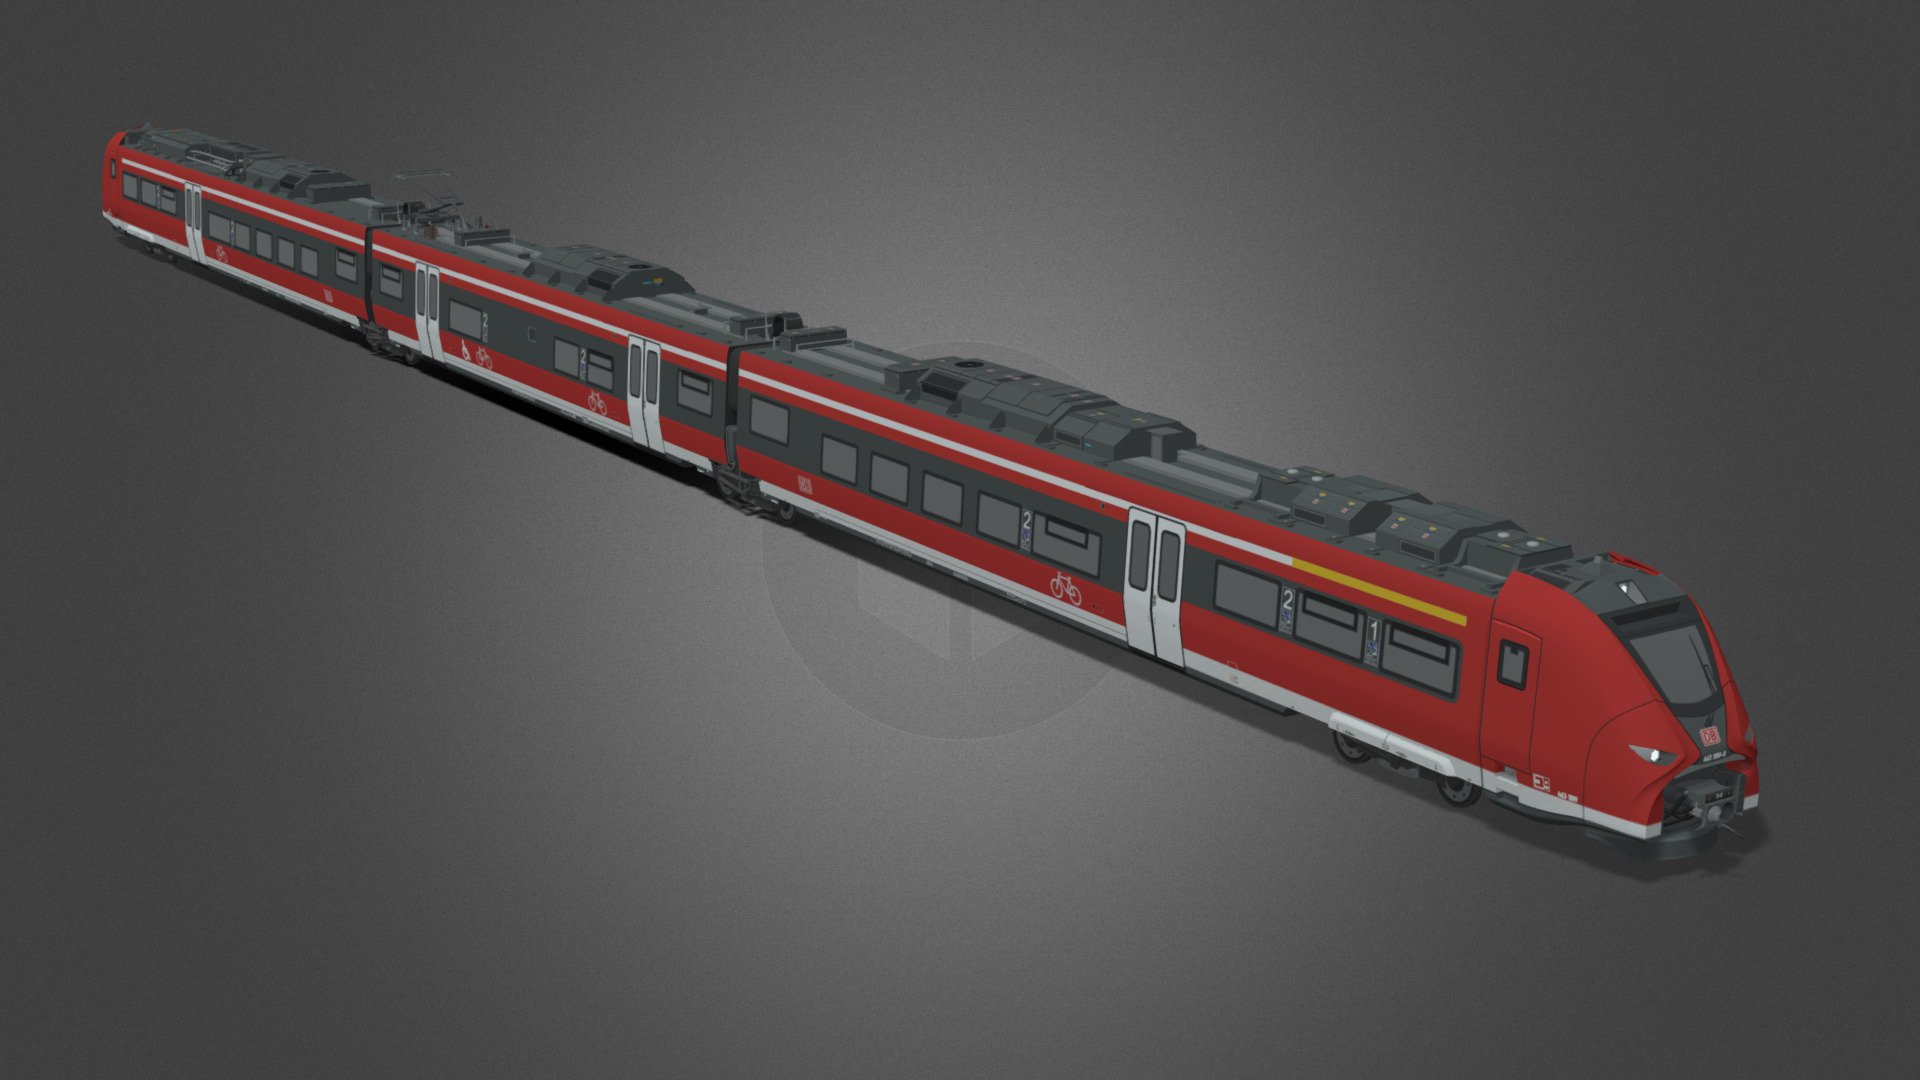 Siemens Mireo in DB Regio Livery. The Siemens Mireo is an EMU designed by Siemens Mobility. It is designed to be a successor to the &ldquo;Mainline